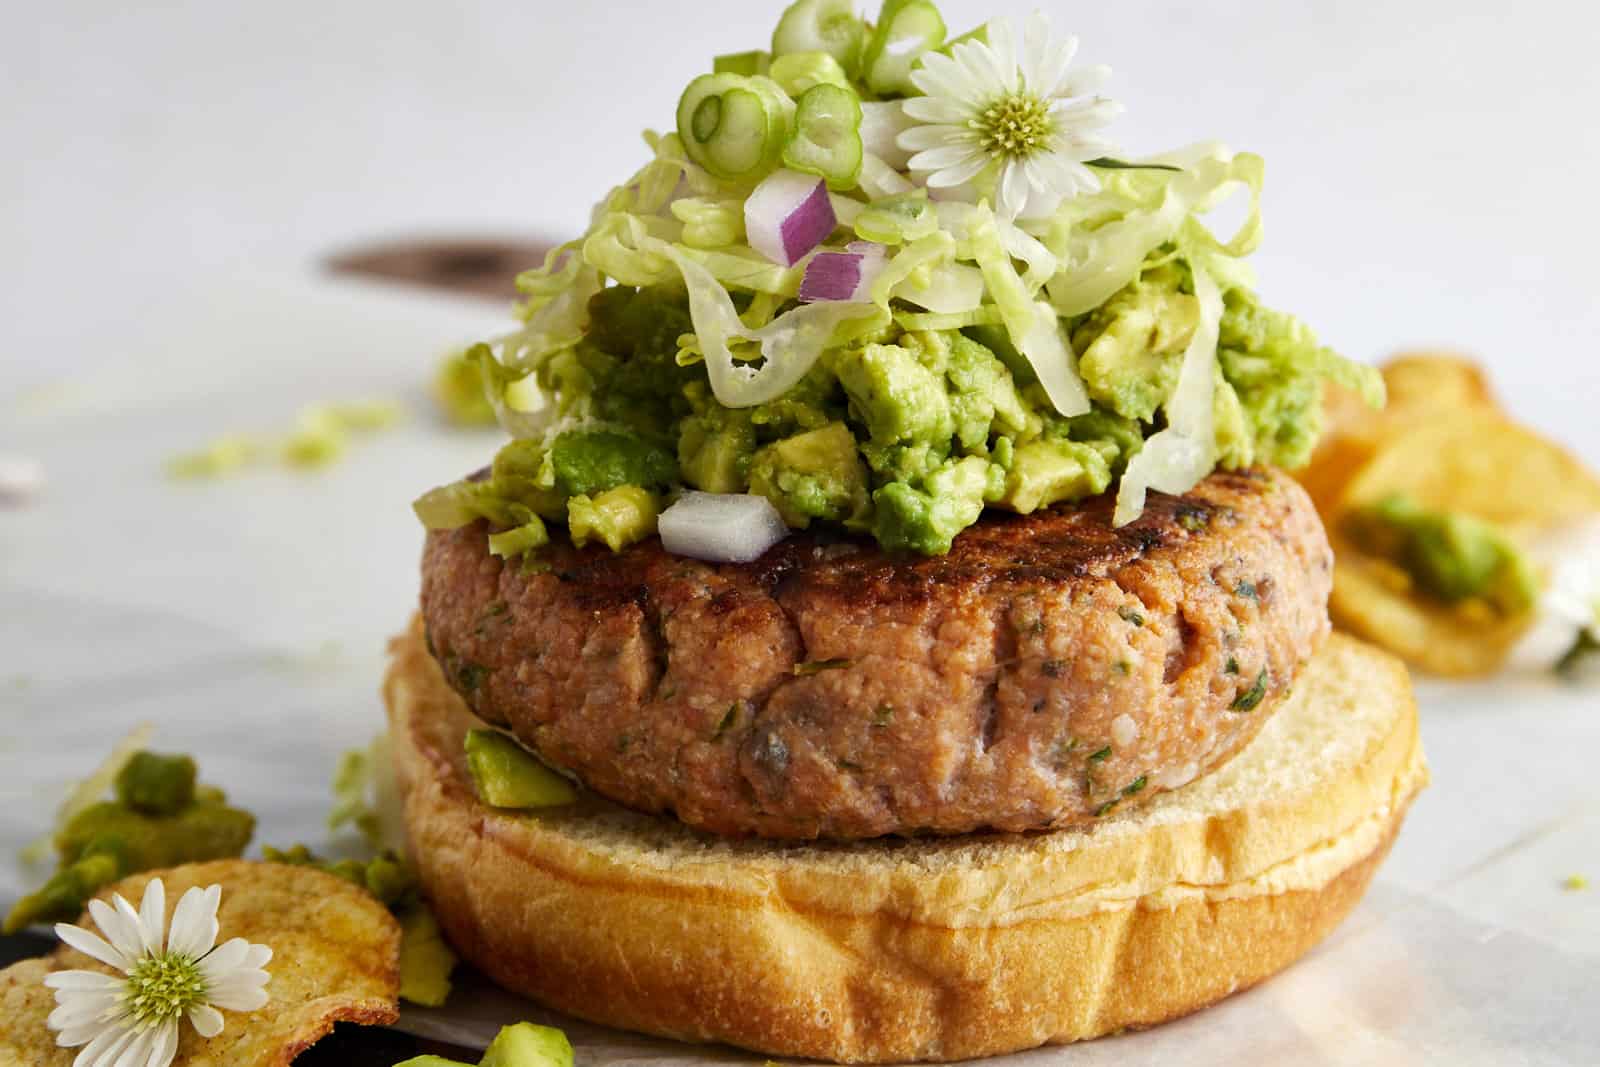 A salmon burger topped with avocado, red onion, shredded lettuce, and green onion.